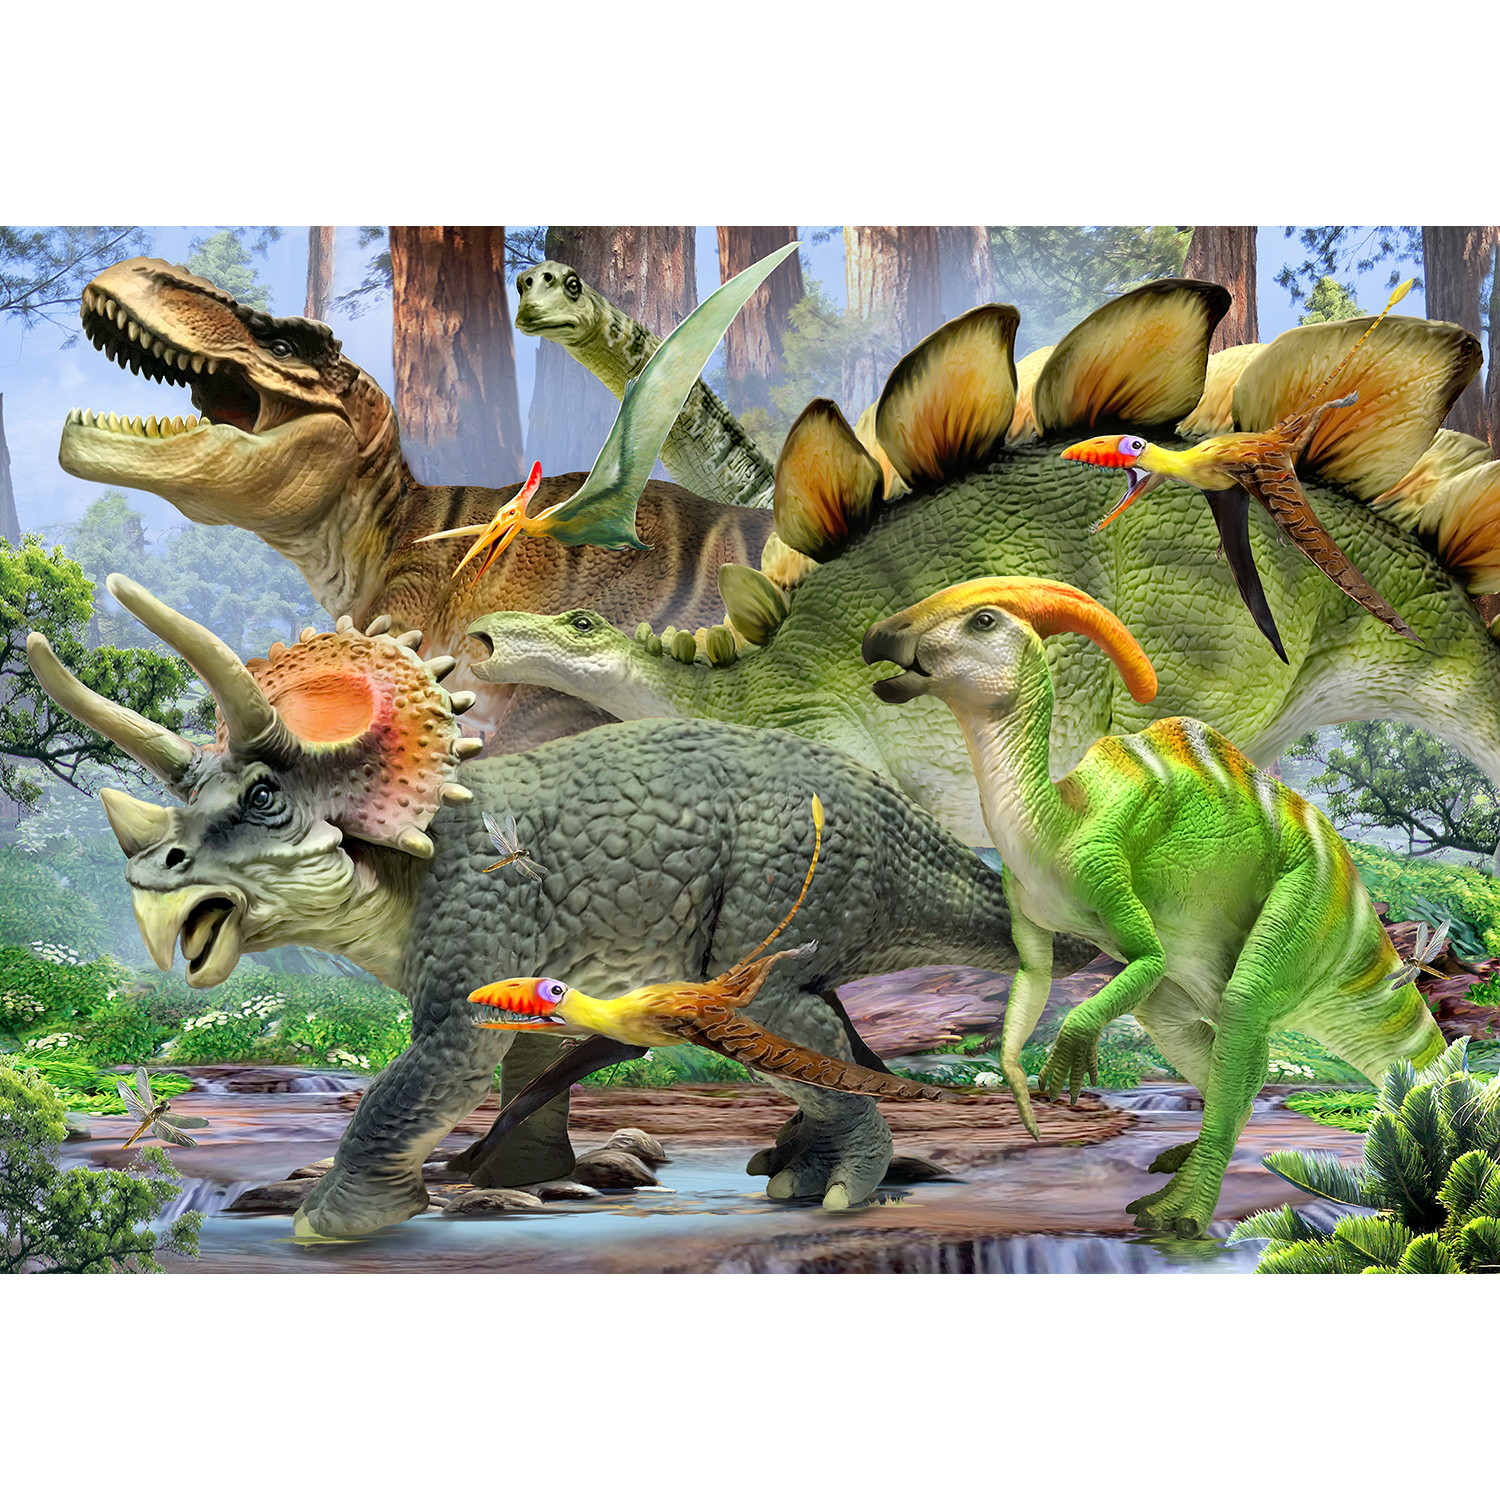 Download Dinosaurs In The Forest 48pc